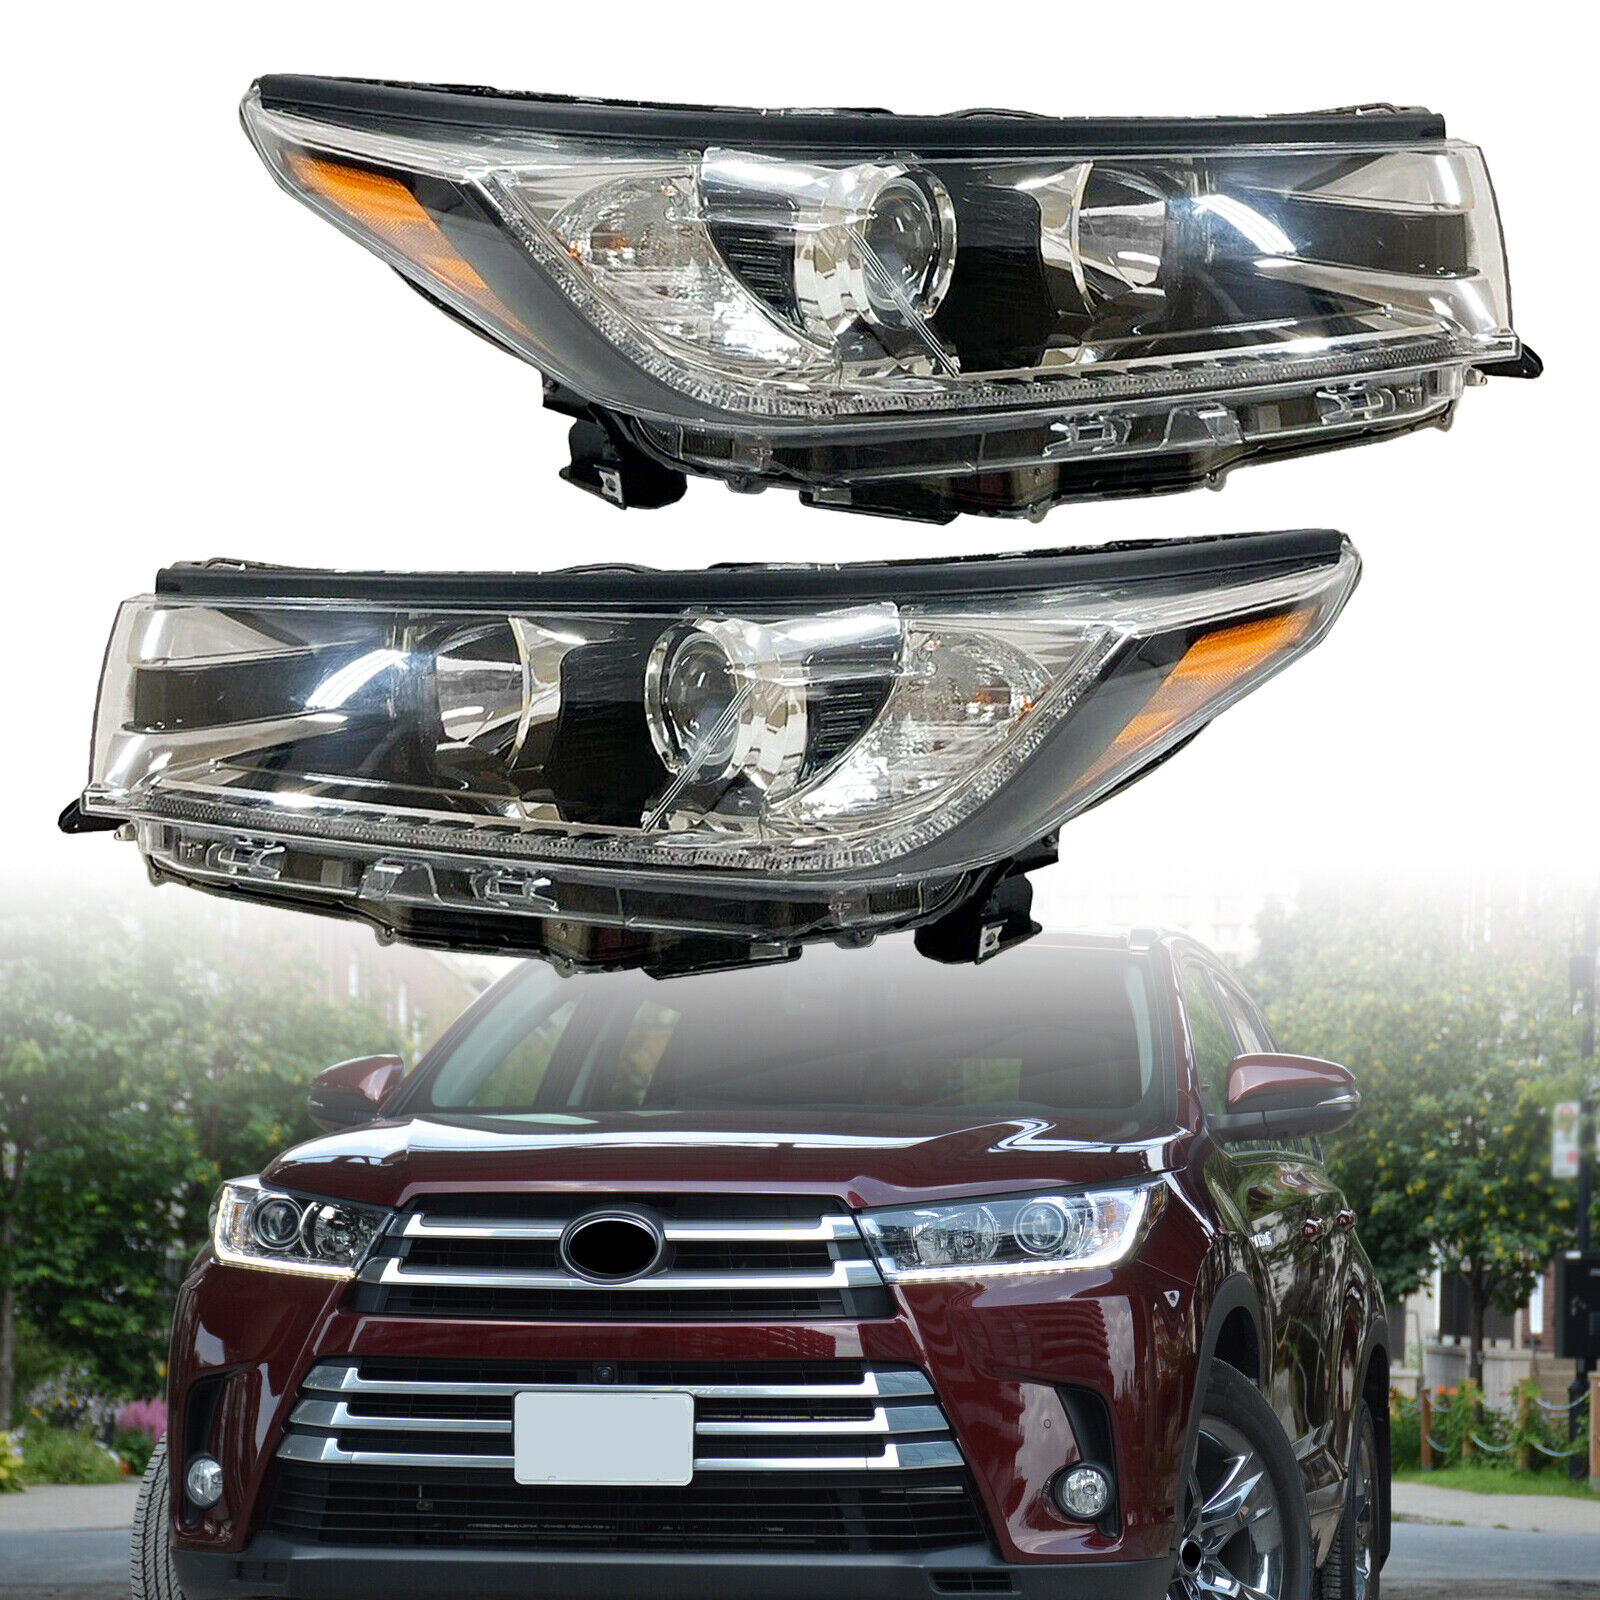 1 Pair of LED DRL Headlights For 2017-2019 Toyota Highlander LE XLE 811500E330